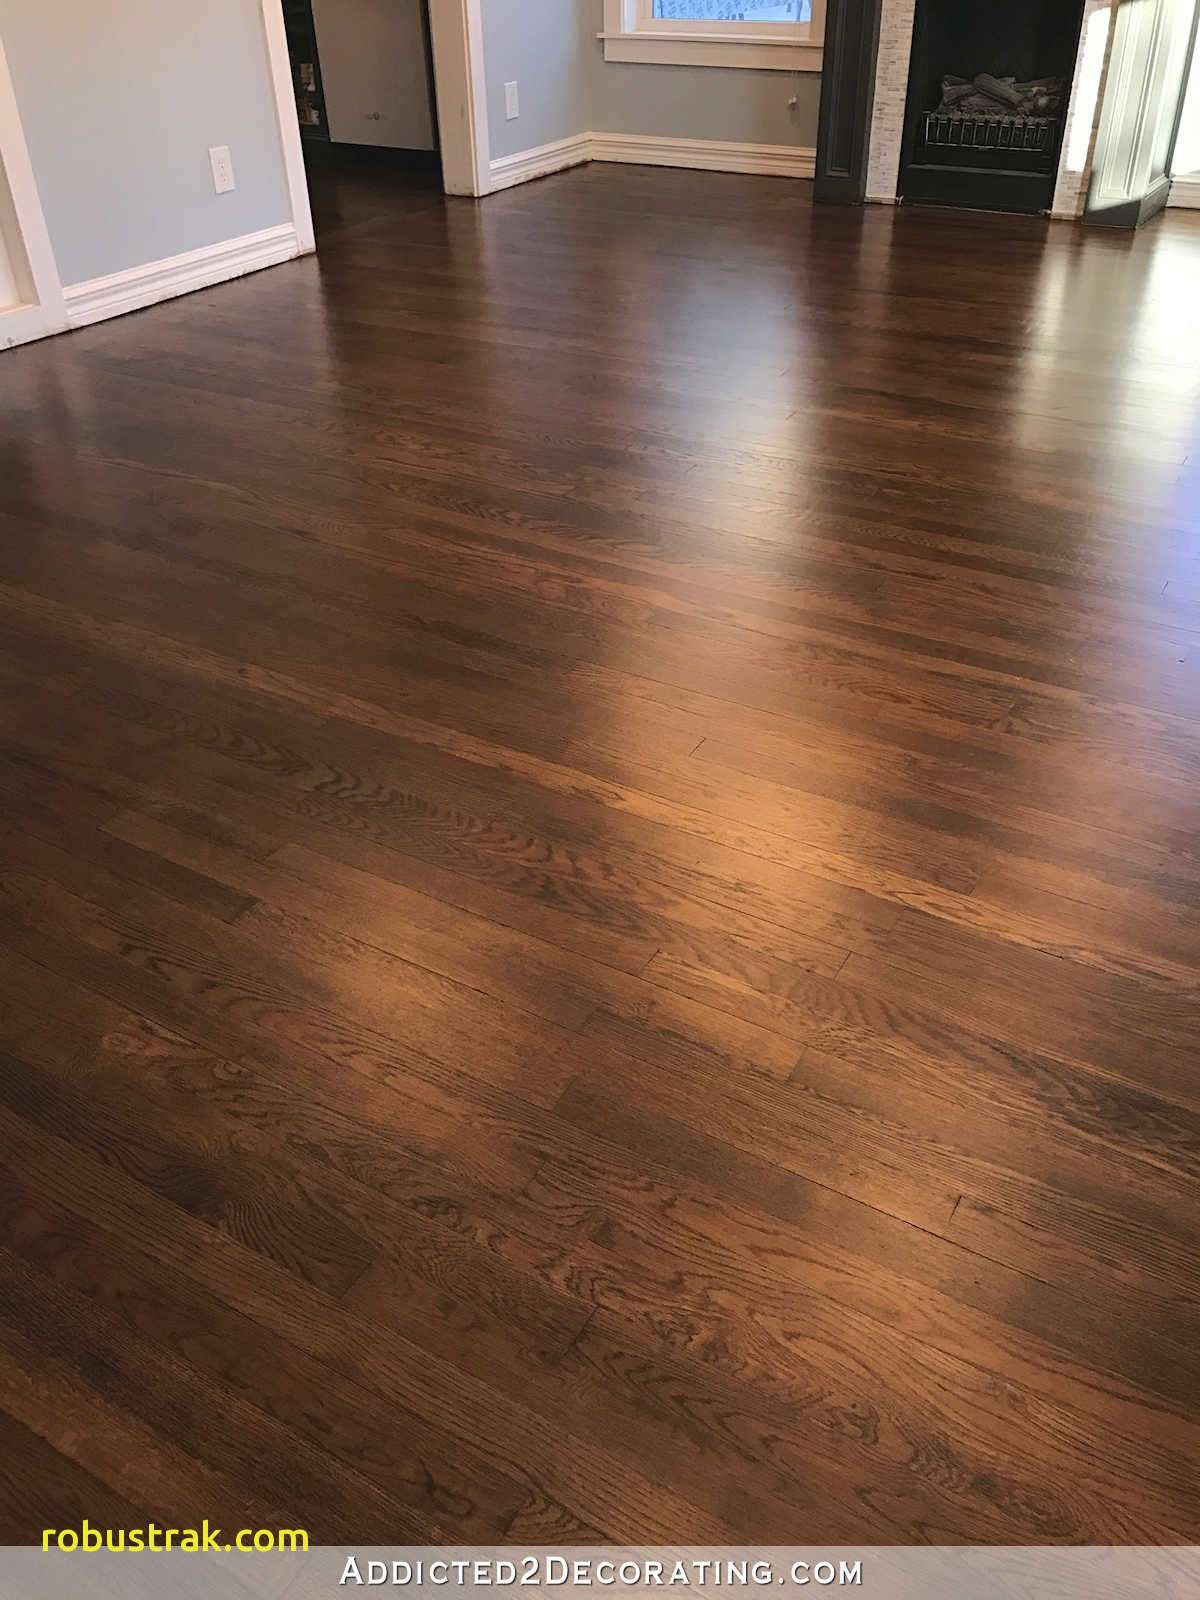 25 attractive Refinishing Red Oak Hardwood Floors 2022 free download refinishing red oak hardwood floors of elegant two different colored wood floors home design ideas within refinished red oak hardwood floors entryway and living room